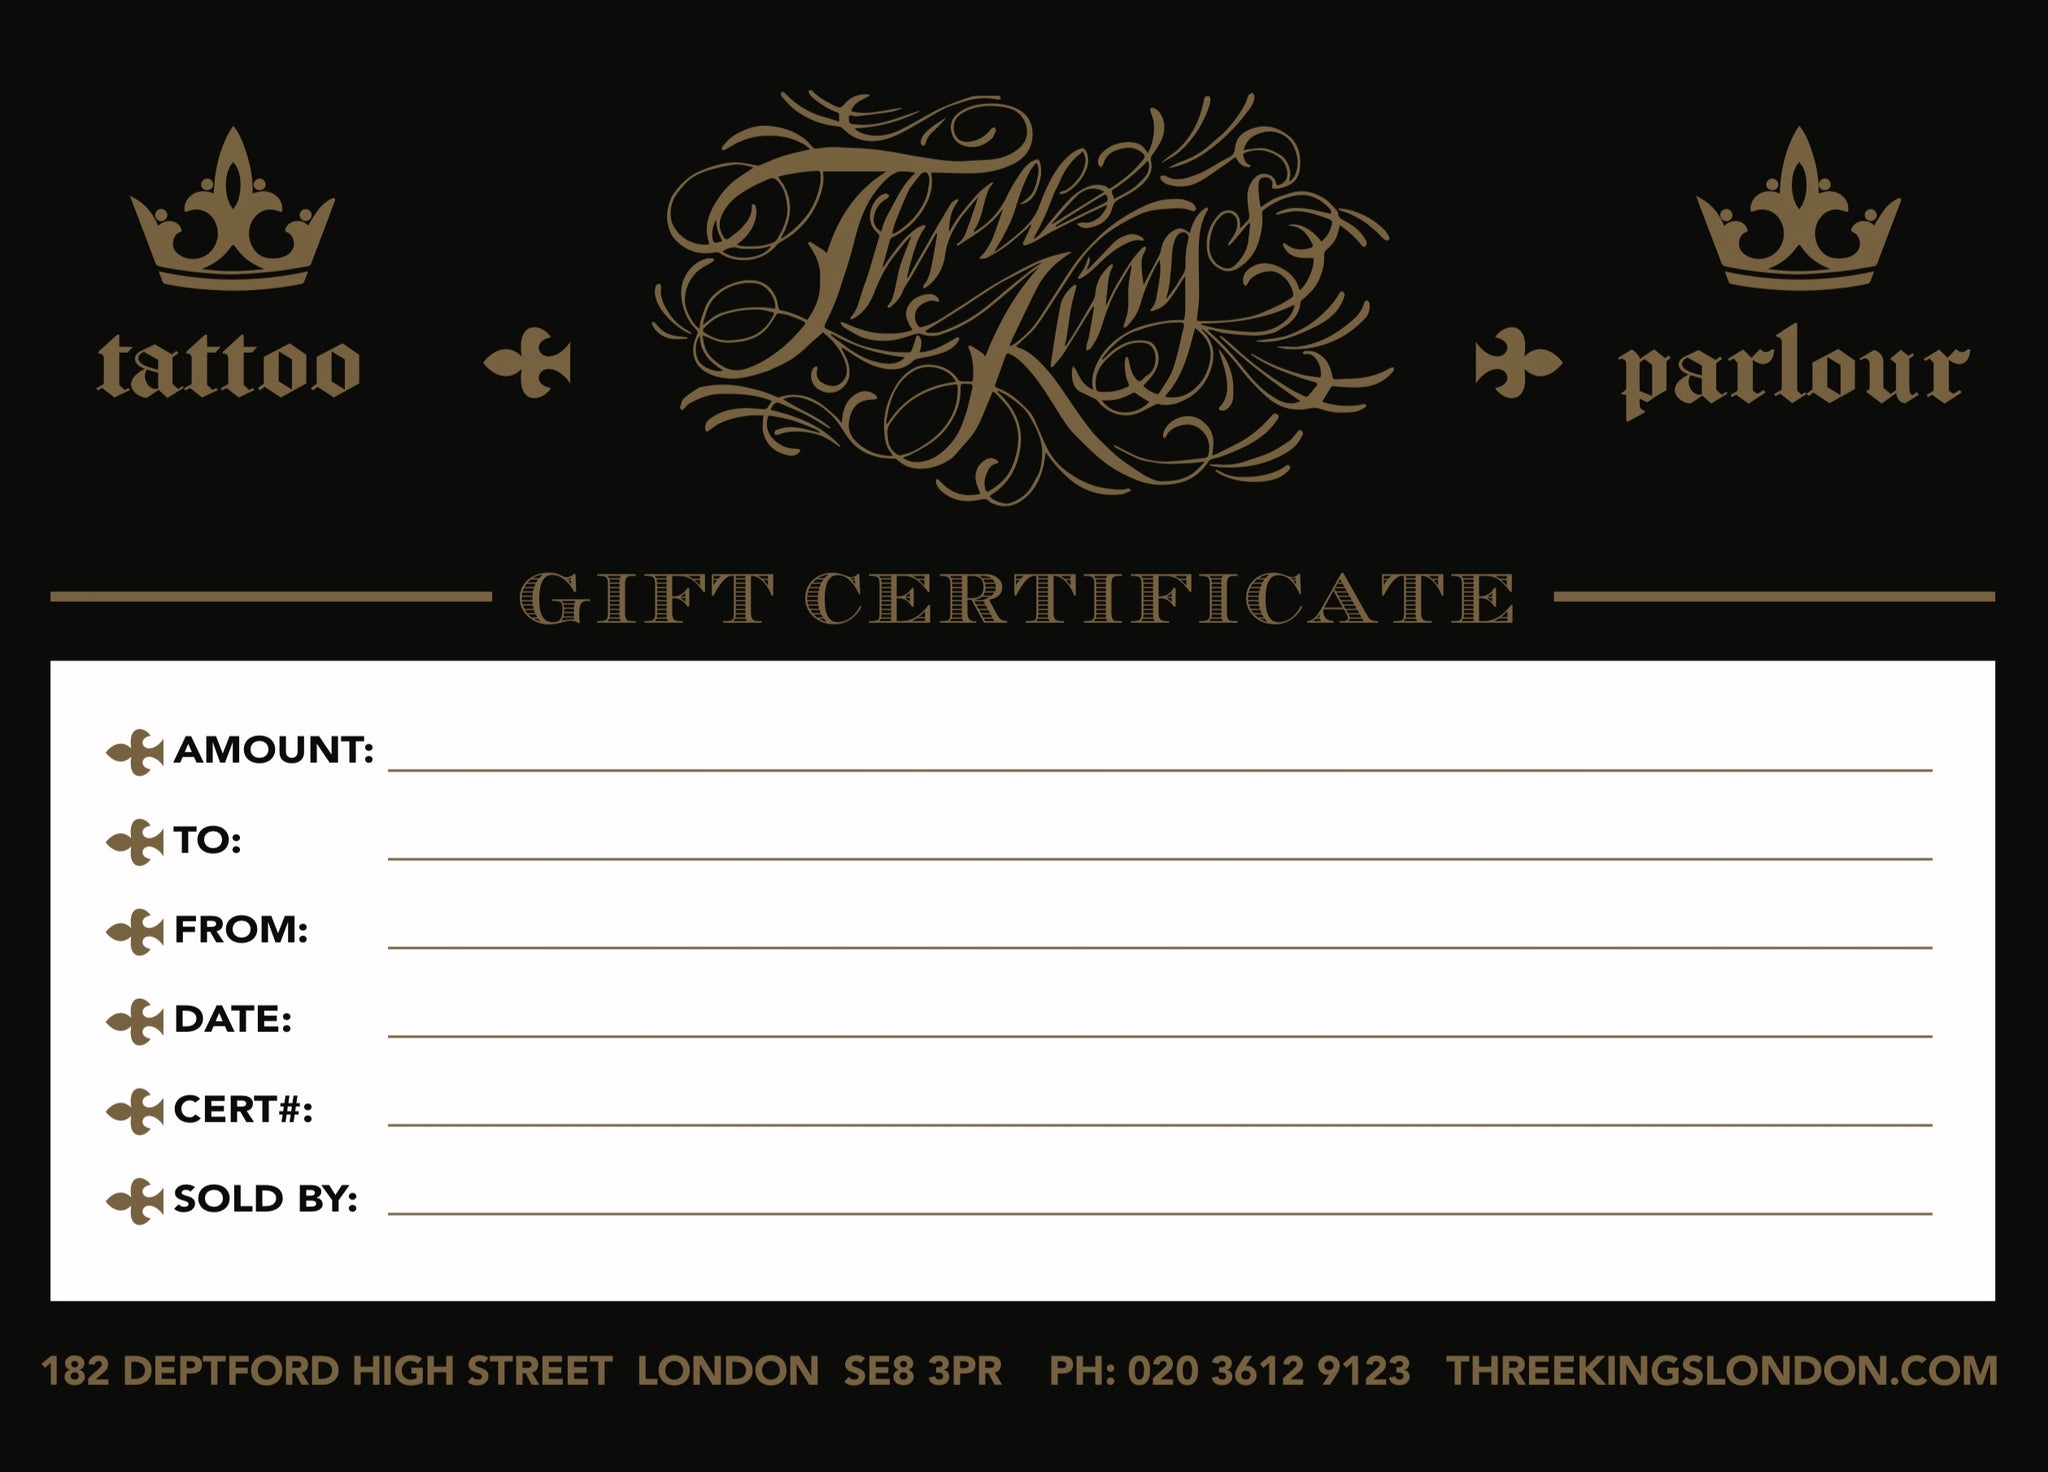 Tattoo Certificate Template Birthday Gift Card Voucher Ticket Printable  Card Coupon Heart Design Get Inked EDITABLE TEXT DOWNLOAD - Etsy